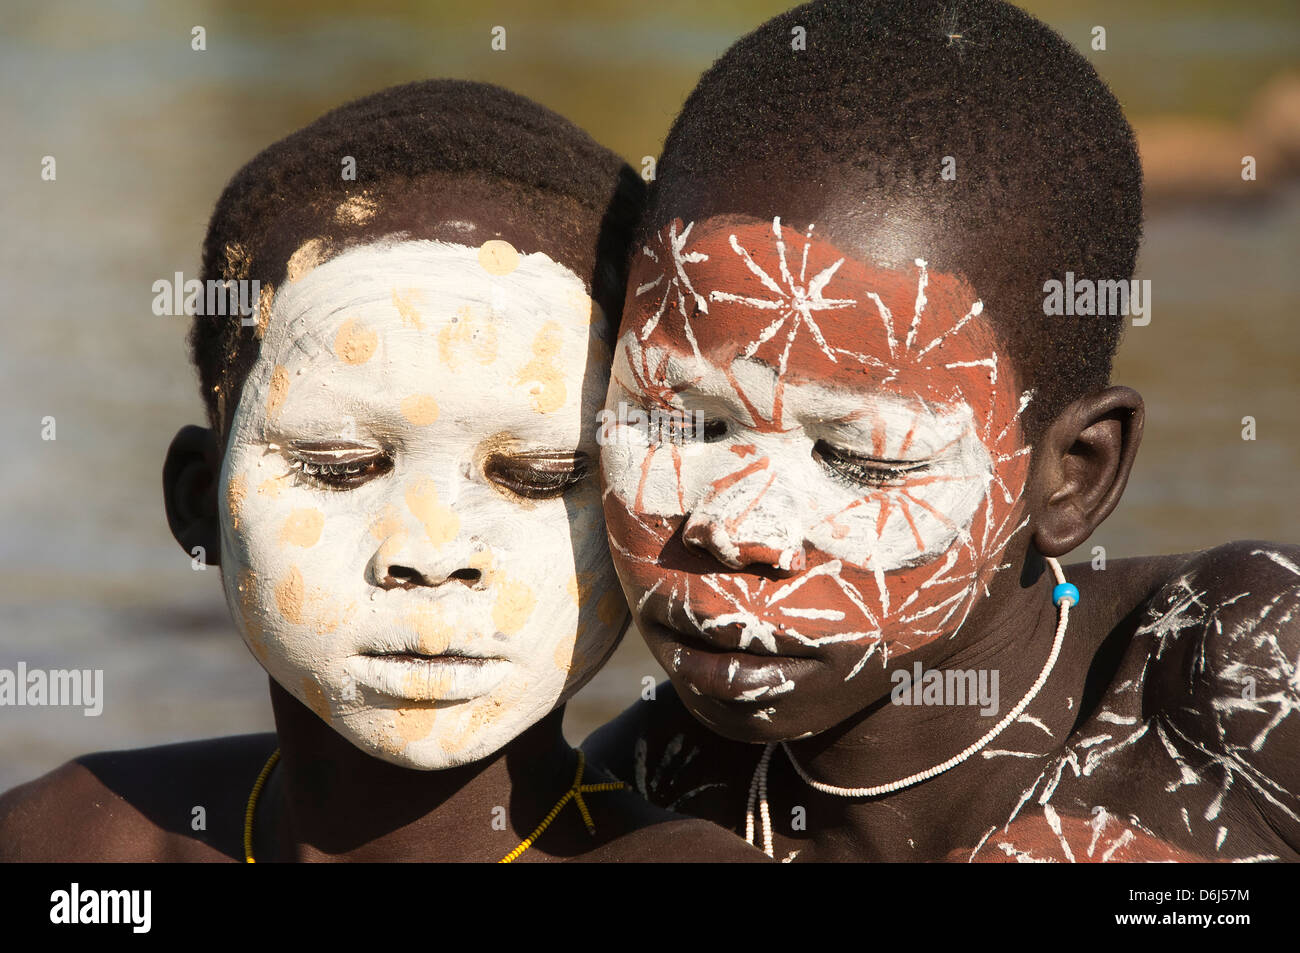 Portrait of two Surma boys with body paintings, Kibish, Omo River Valley, Ethiopia, Africa Stock Photo